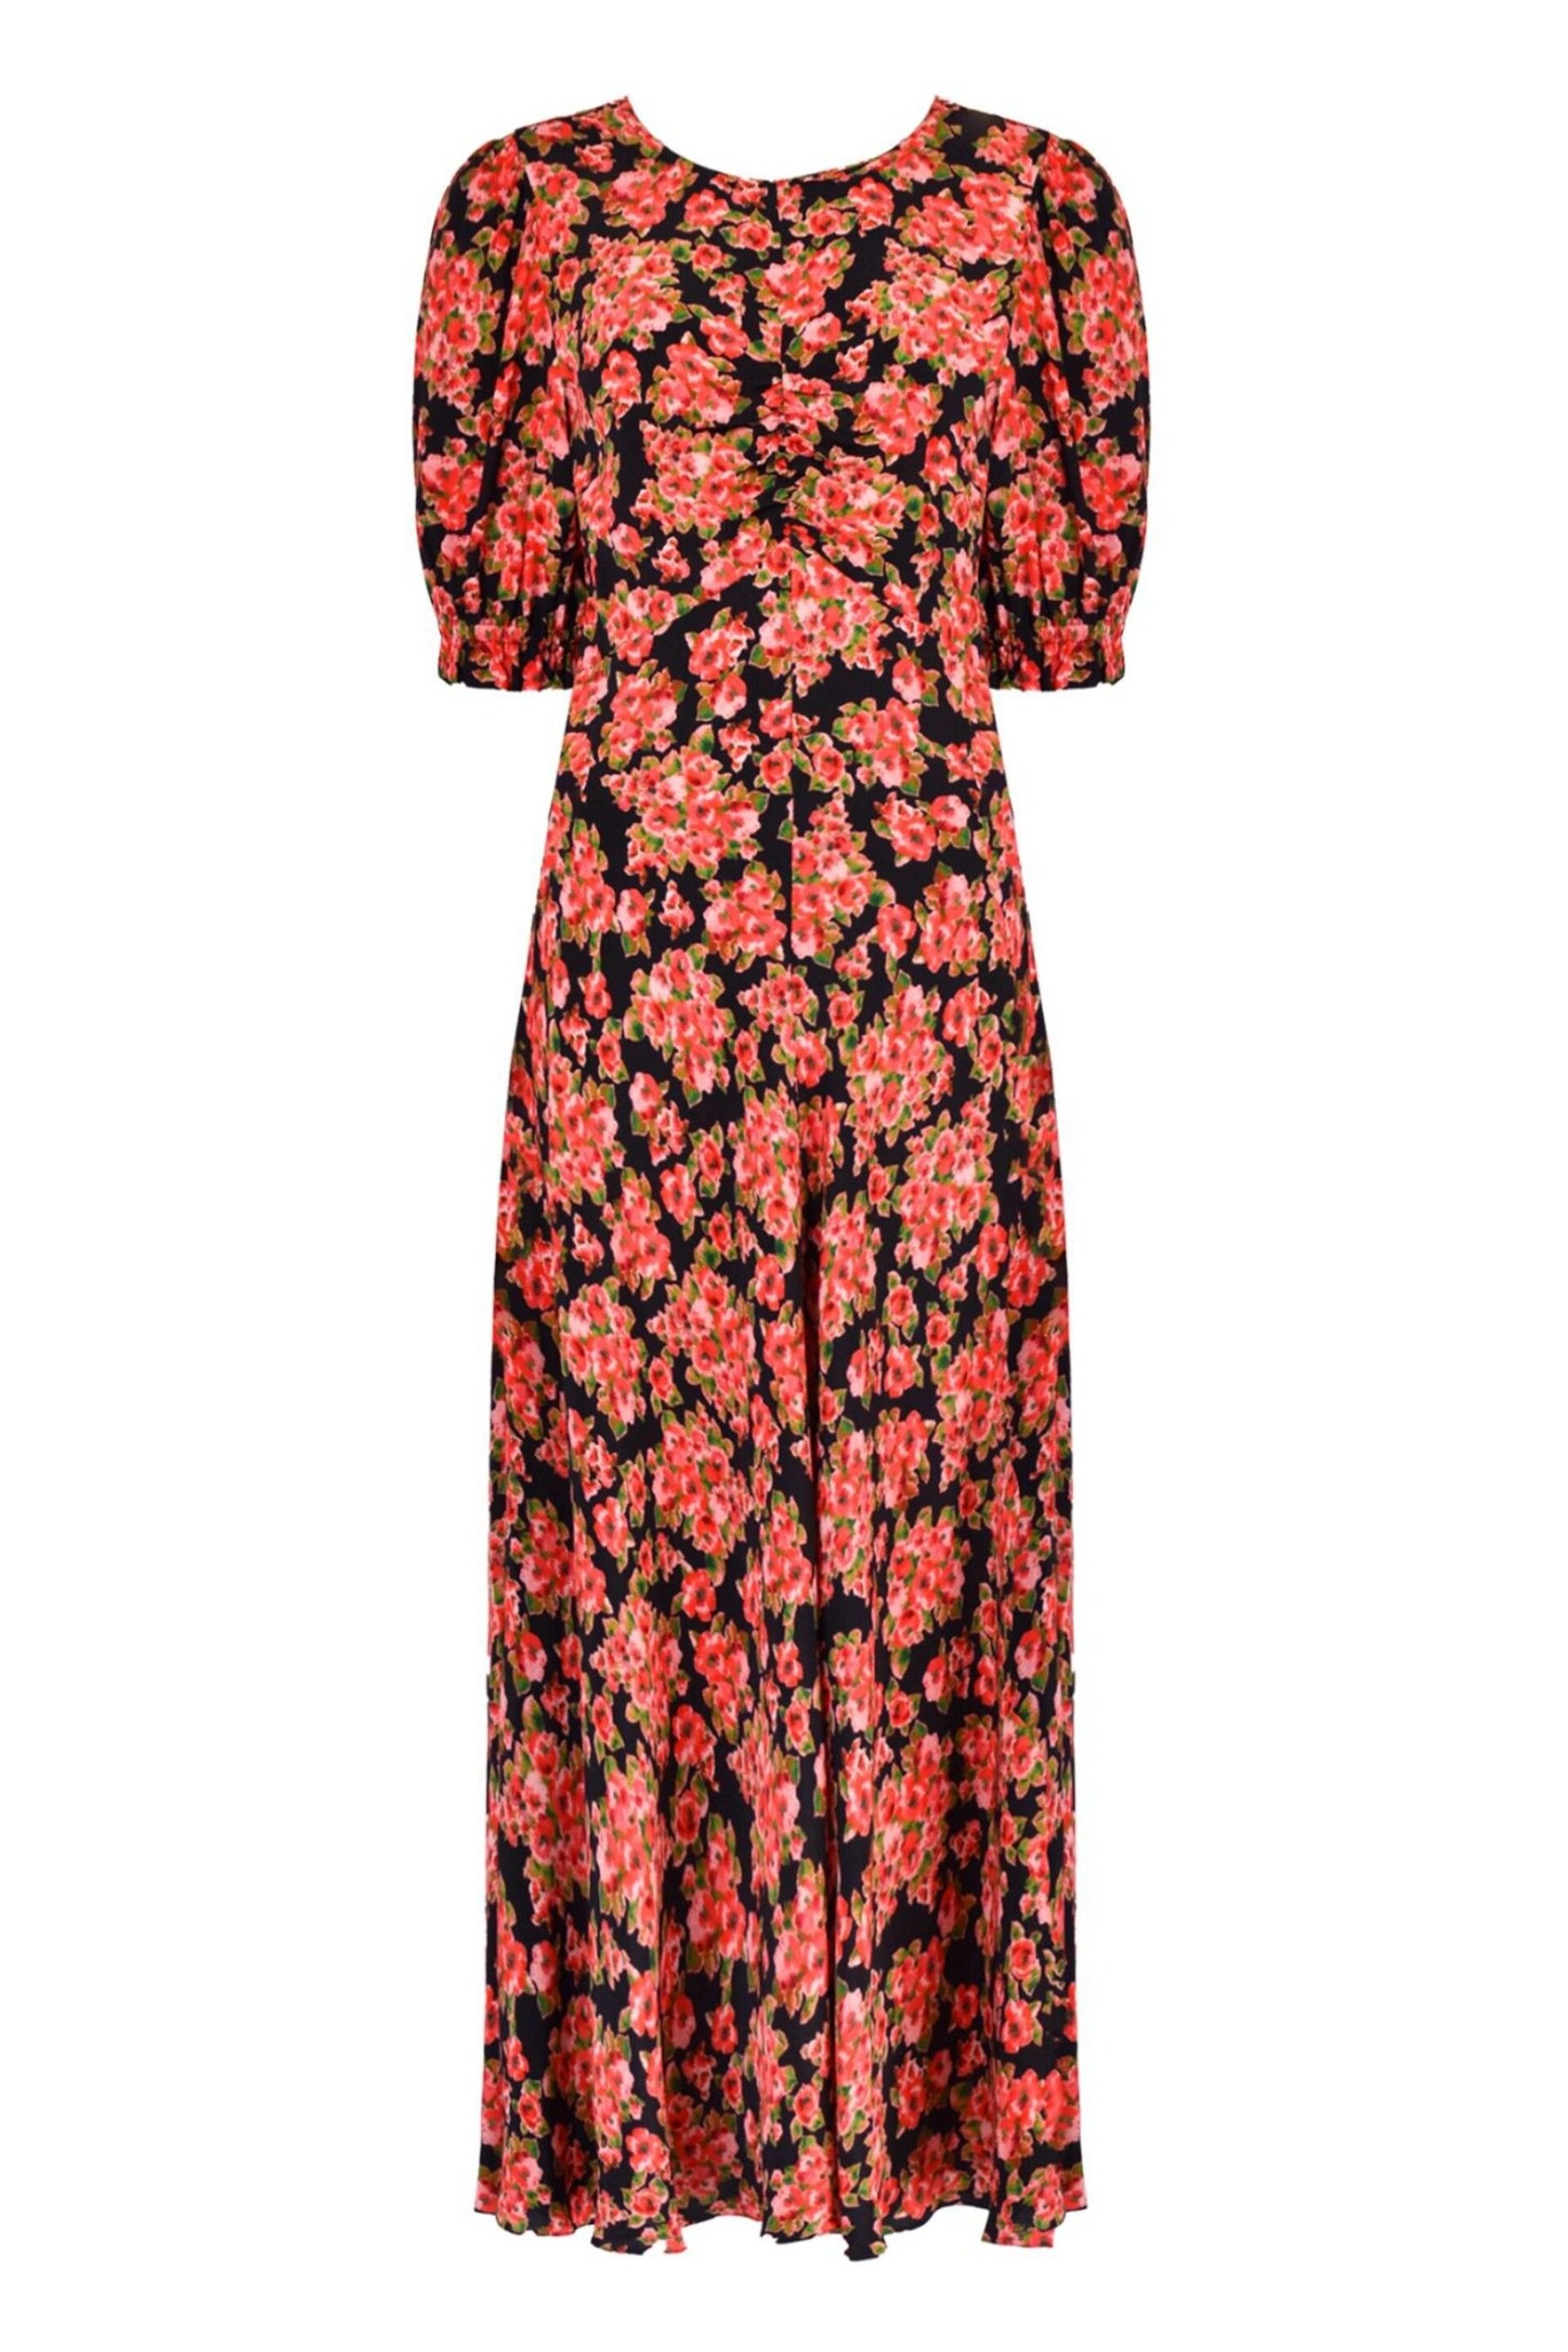 Ro&Zo Petite Red Rose Print Ruched Front Midi Dress - Image 5 of 5